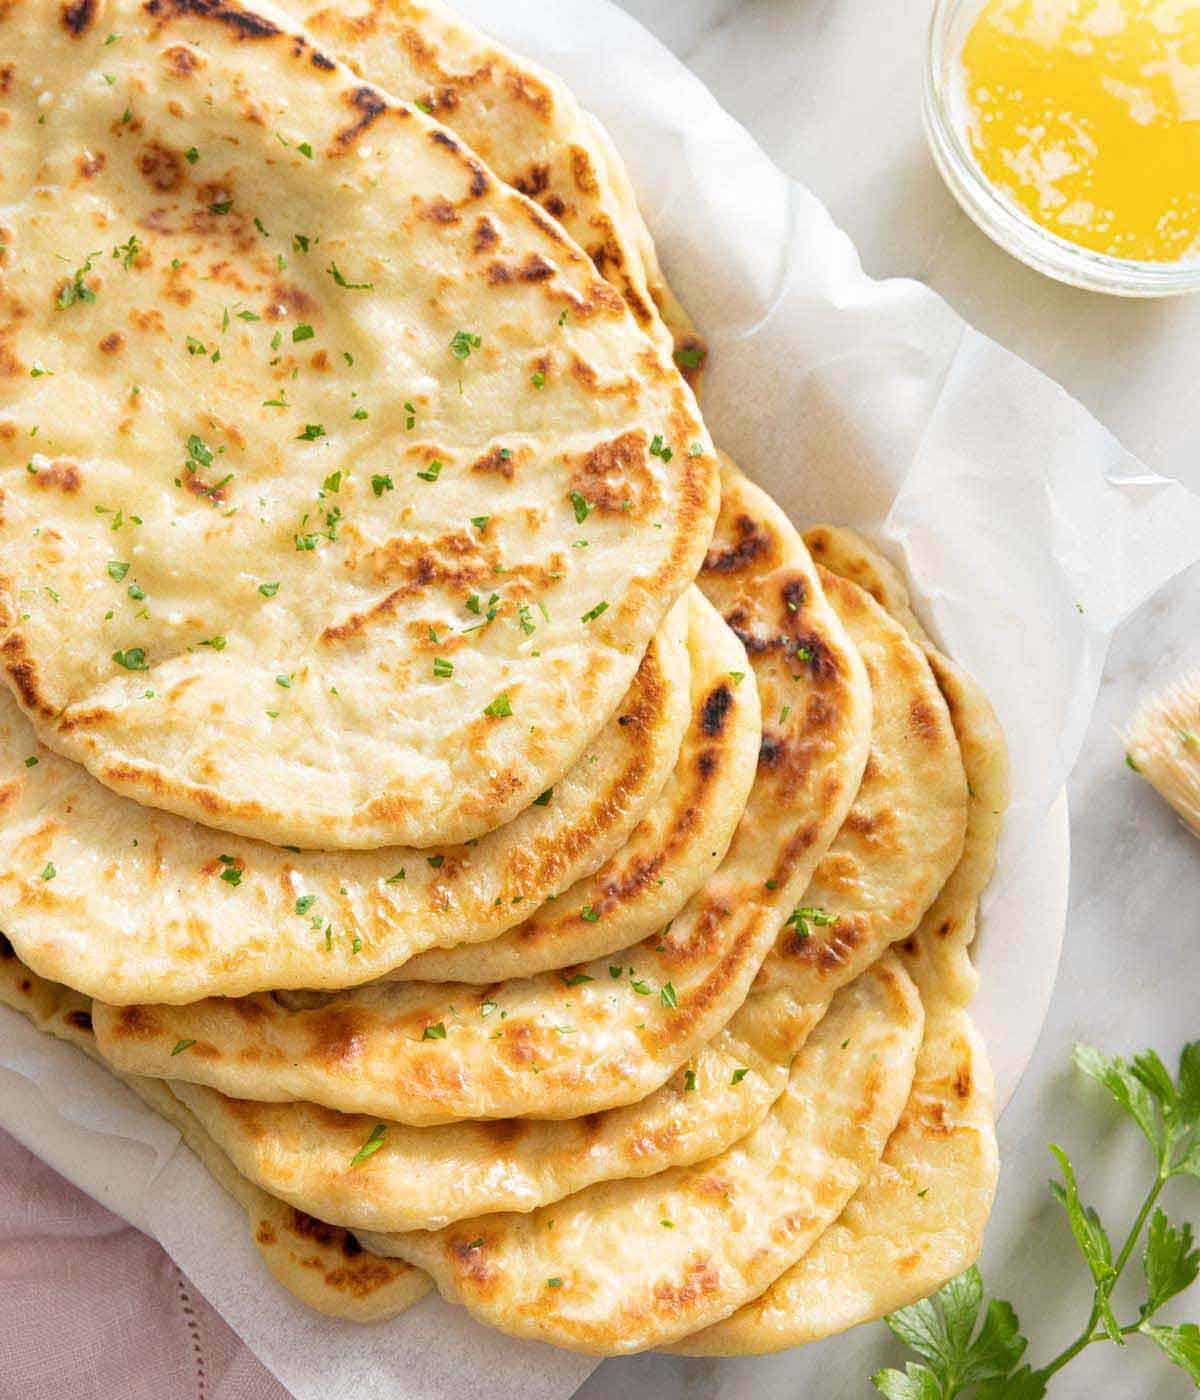 A stack of naan bread in a parchment lined platter.